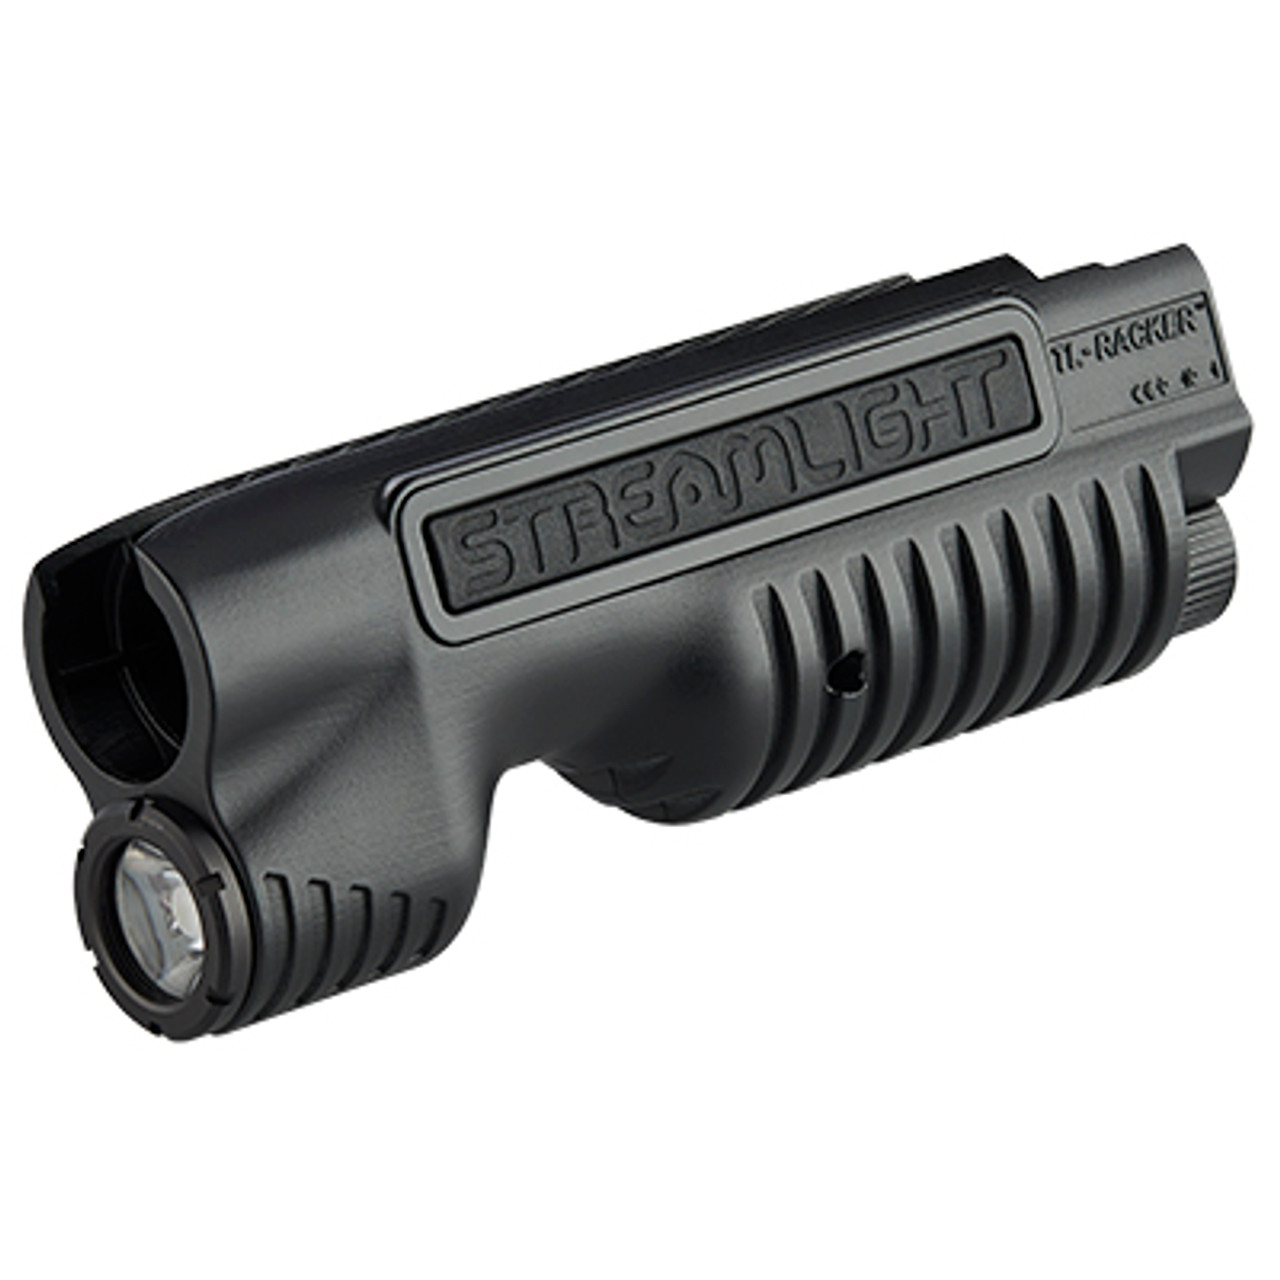 Streamlight 69602 TL Racker - Mossberg 590 Shockwave with strap and CR123A lithium batteries - Box - Black - DSS